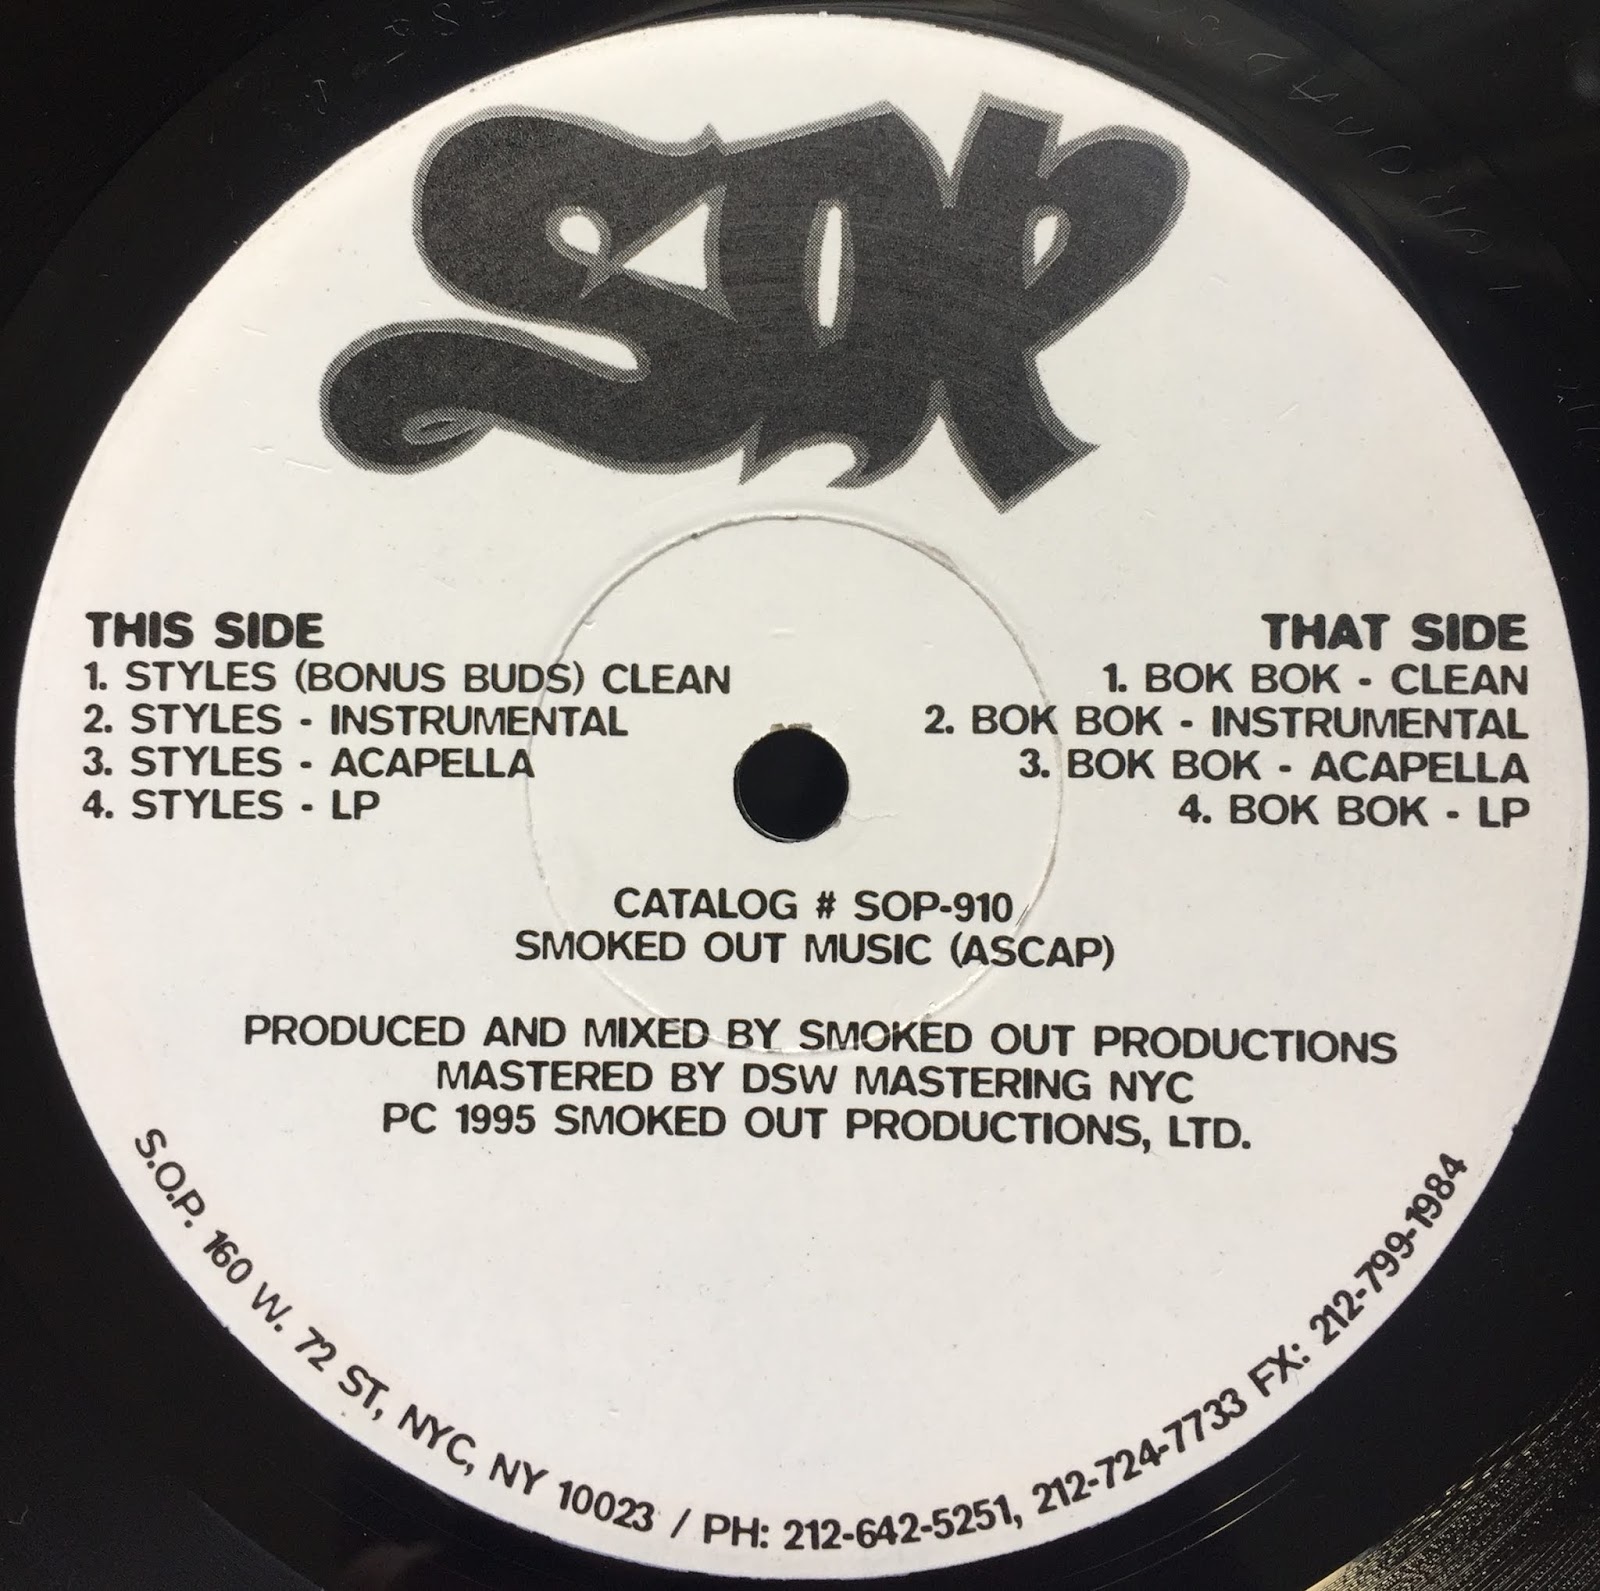 HipHop-TheGoldenEra: SOP a.k.a Smoked Out Productions